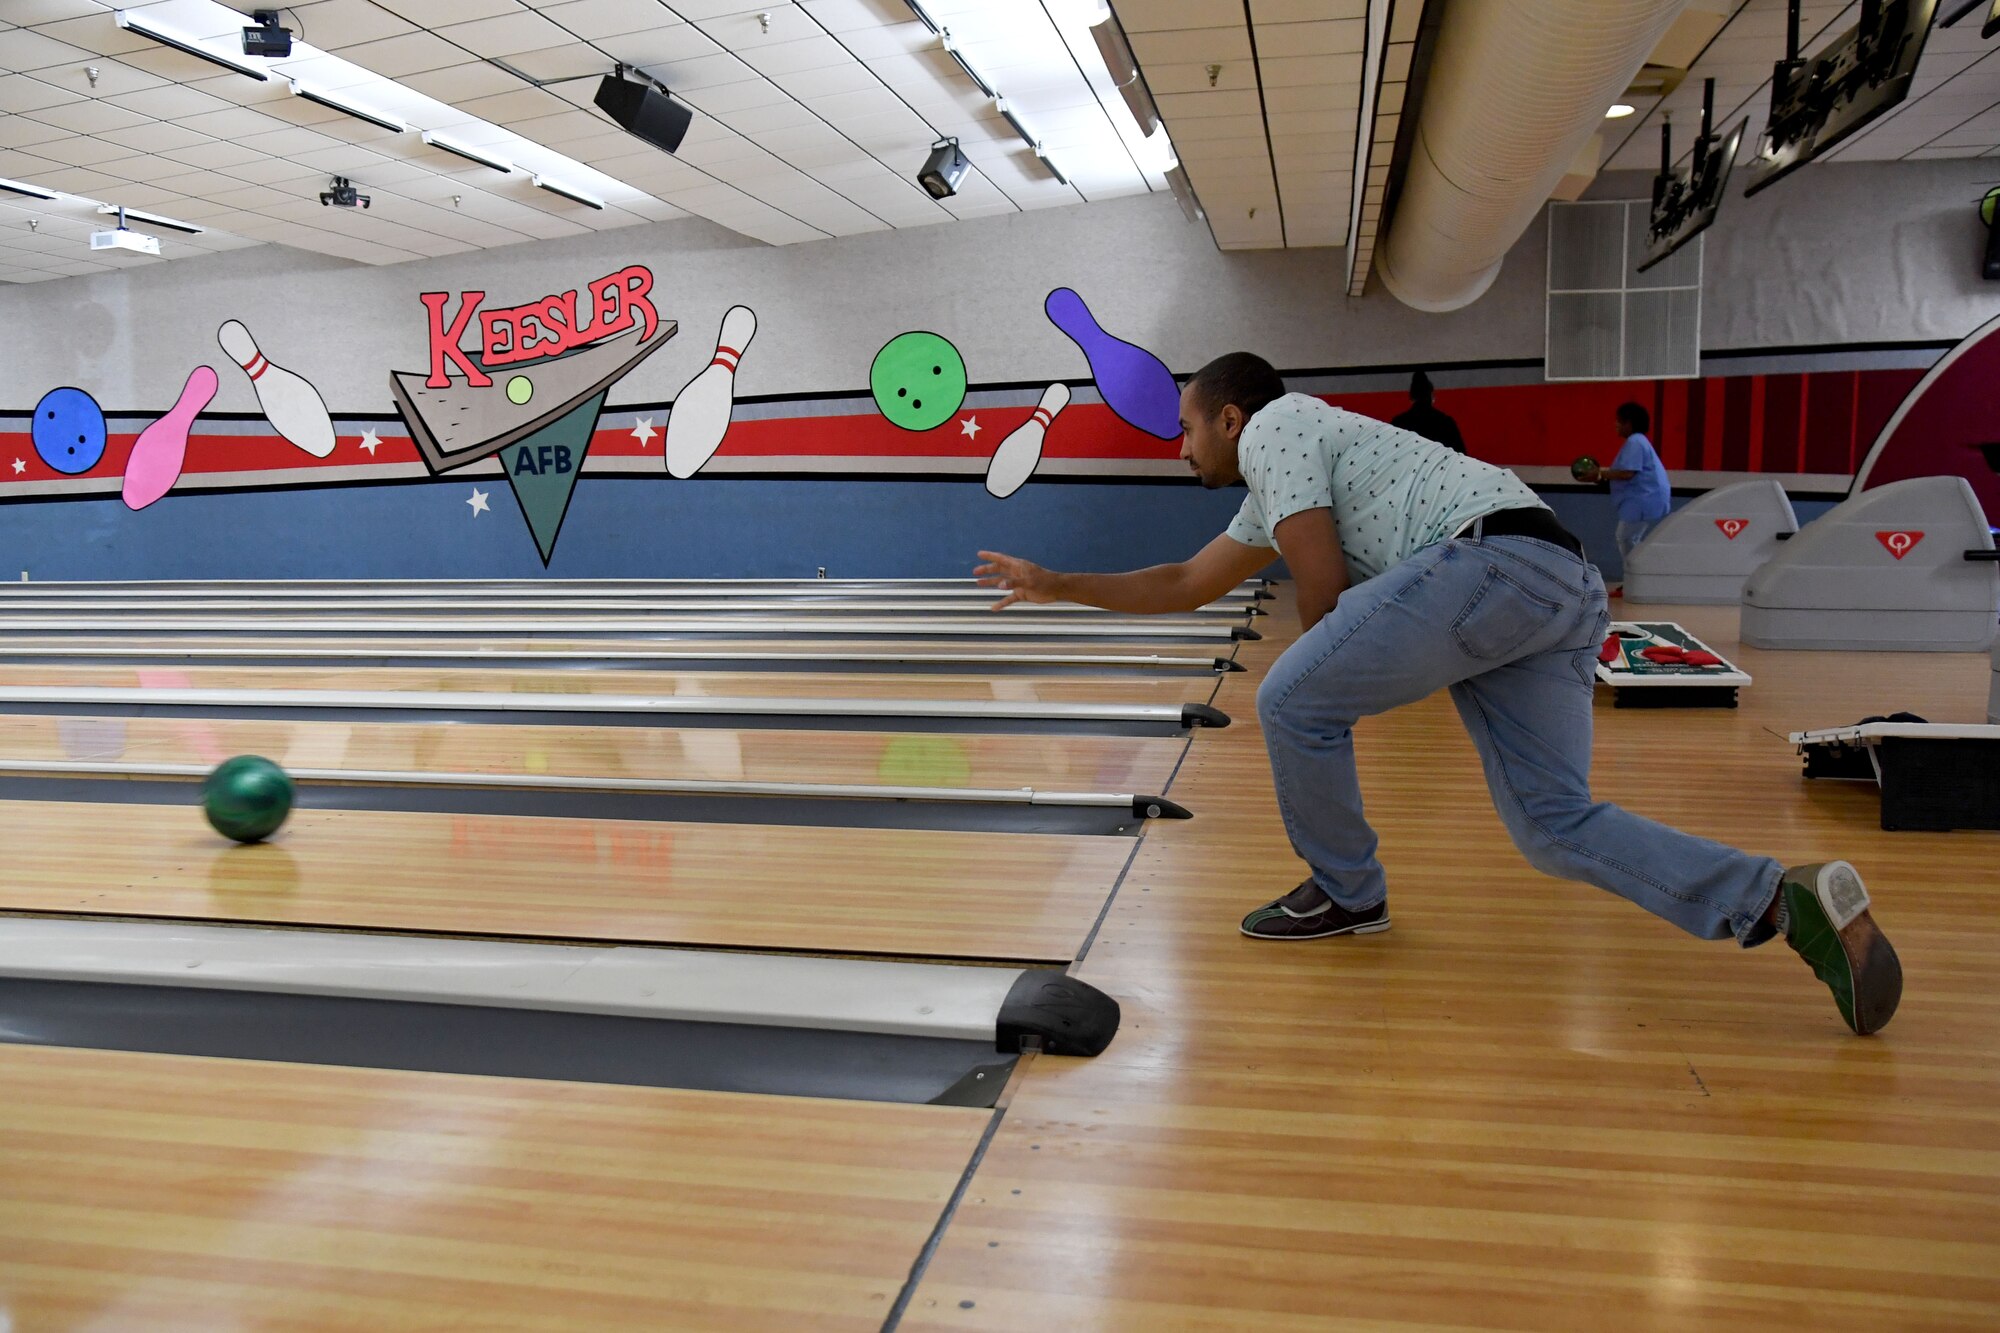 U.S. Air Force Senior Airman Isaiah Harper, 81st Operations Support Flight air traffic control tower operator, bowls during the Strike Out Sexual Assault Bowling Tournament inside Gaude Lanes at Keesler Air Force Base, Mississippi, April 1, 2022. The event was held in awareness of Sexual Assault and Awareness Prevention Month which is recognized throughout April. (U.S. Air Force photo by Kemberly Groue)